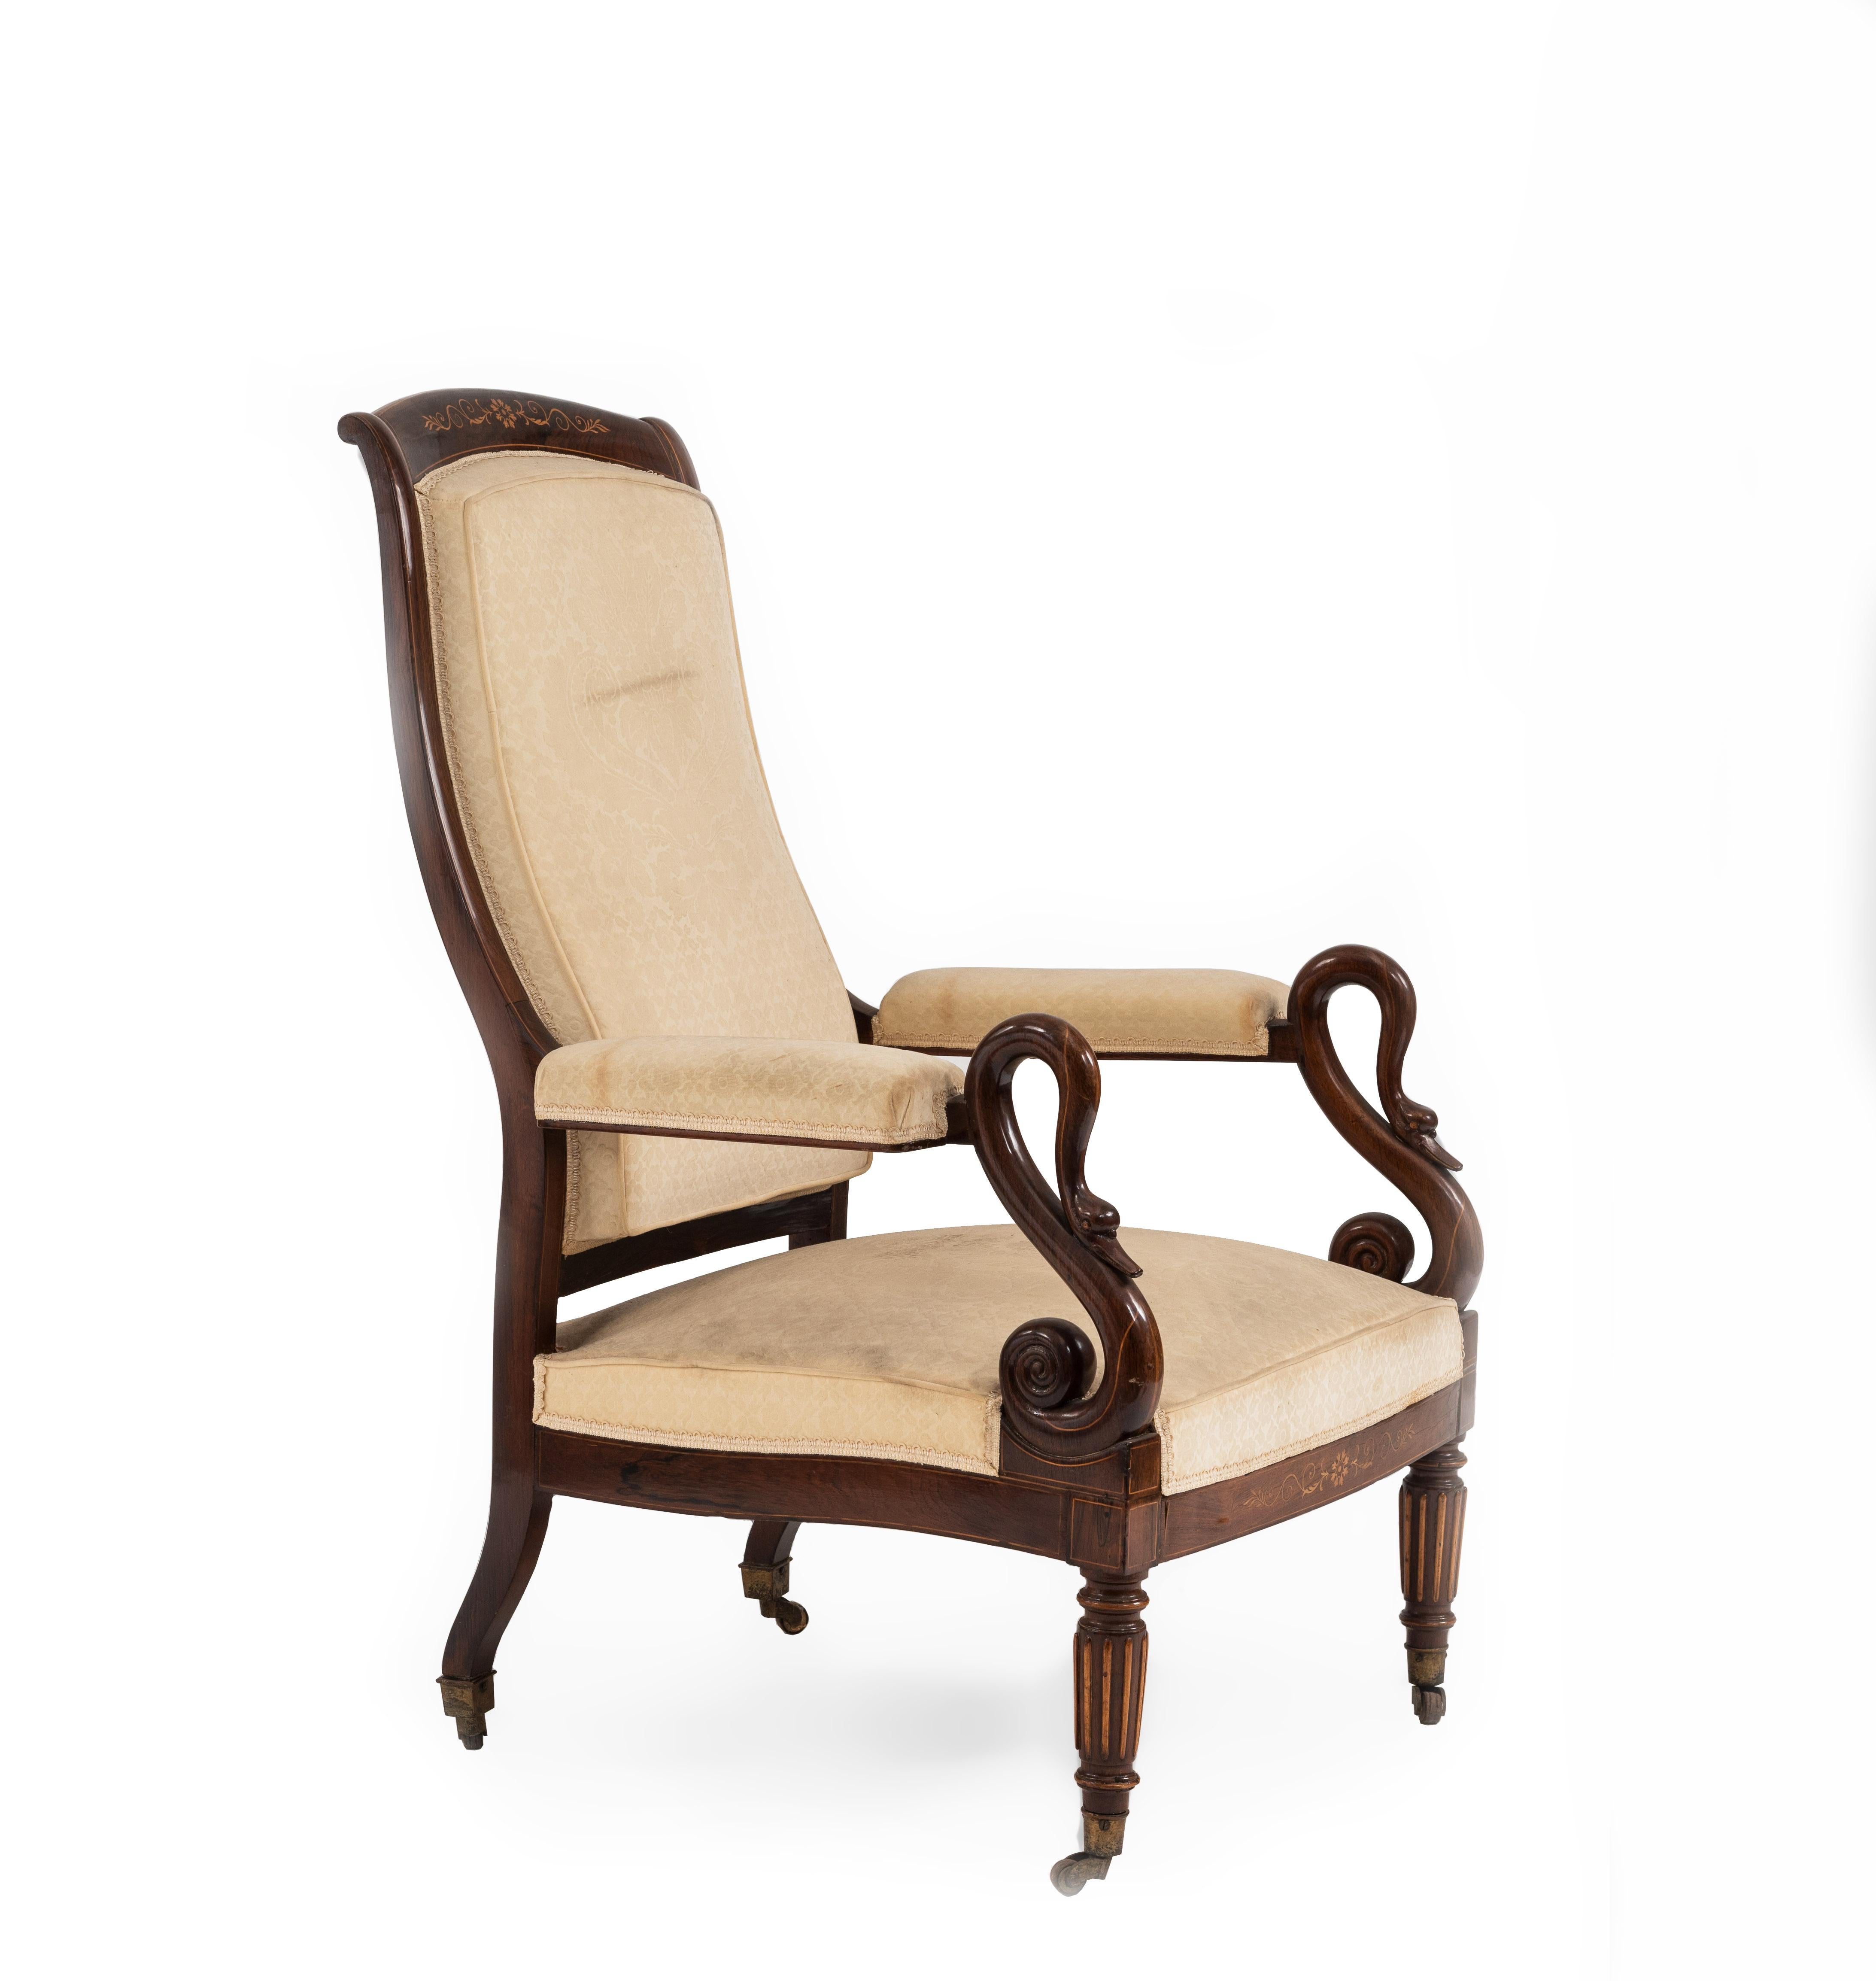 French Charles X (circa 1830) rosewood armchair with swan carved arms and inlaid design with white cut velvet upholstered seat, back and arm rests.
